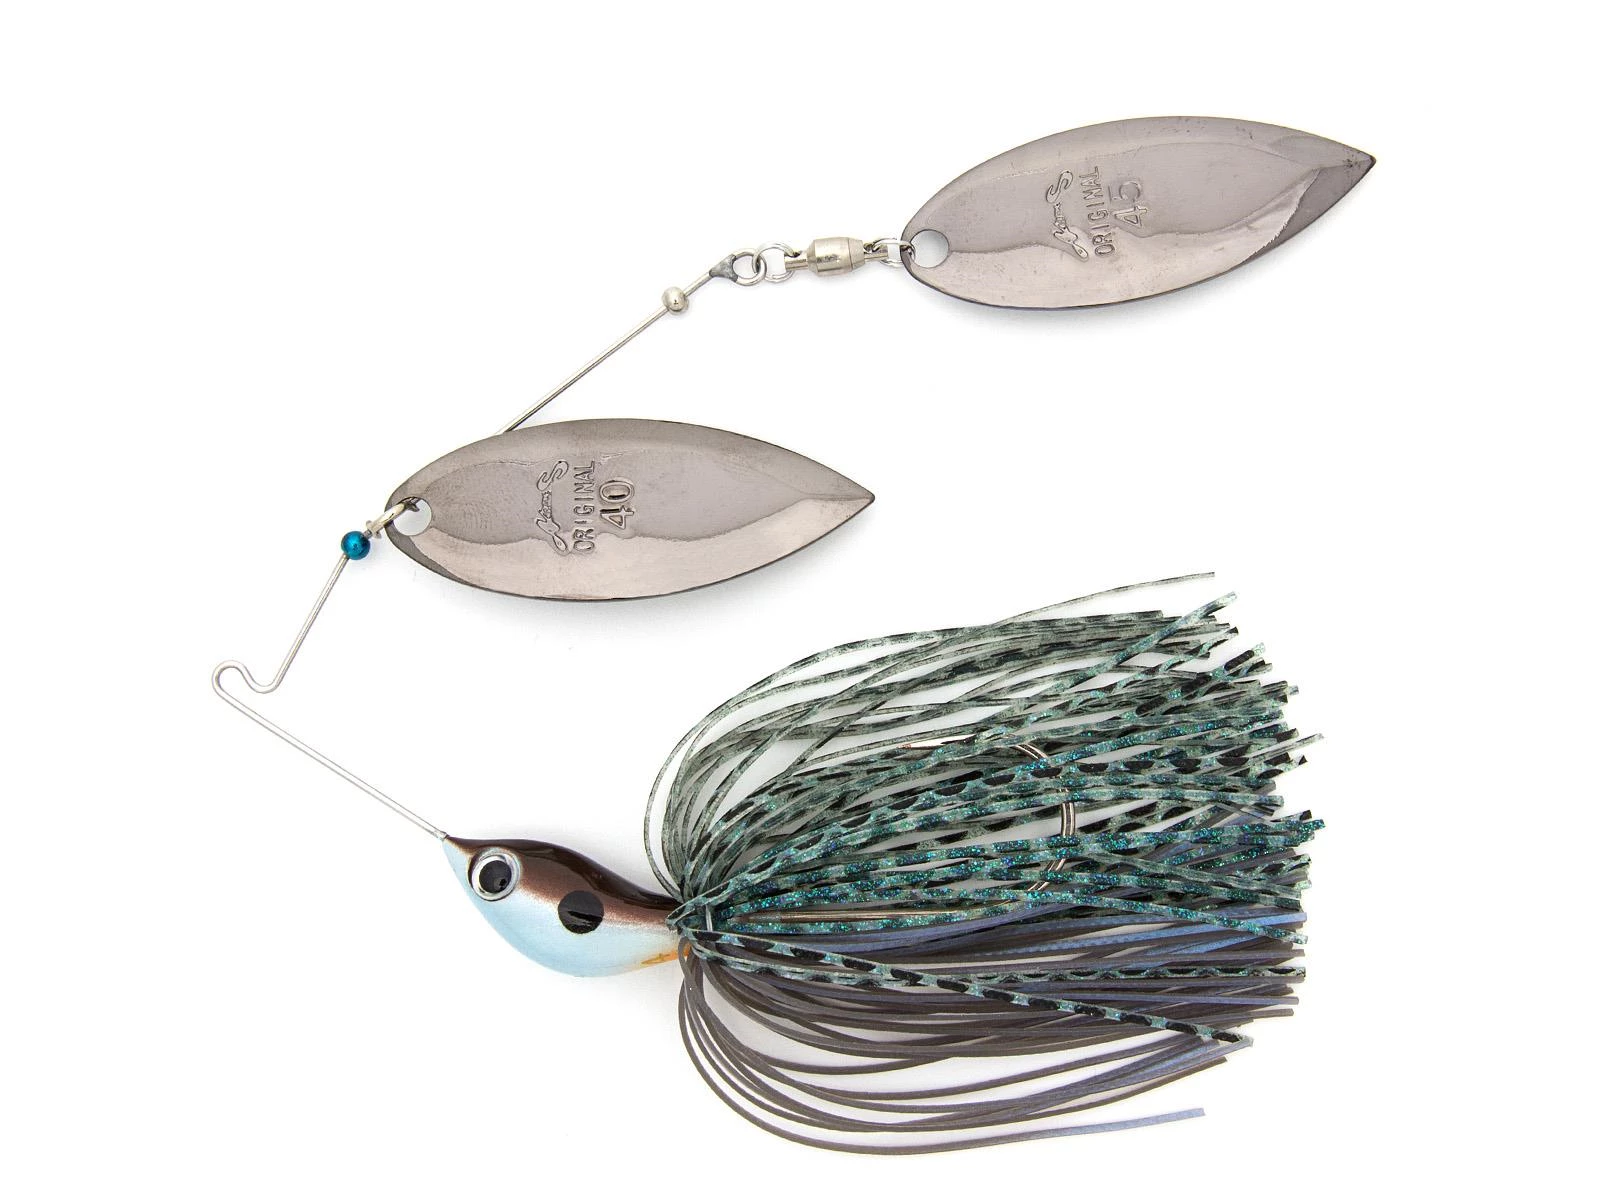 Nories Crystal S Power Roll 21g Live Blue Gill